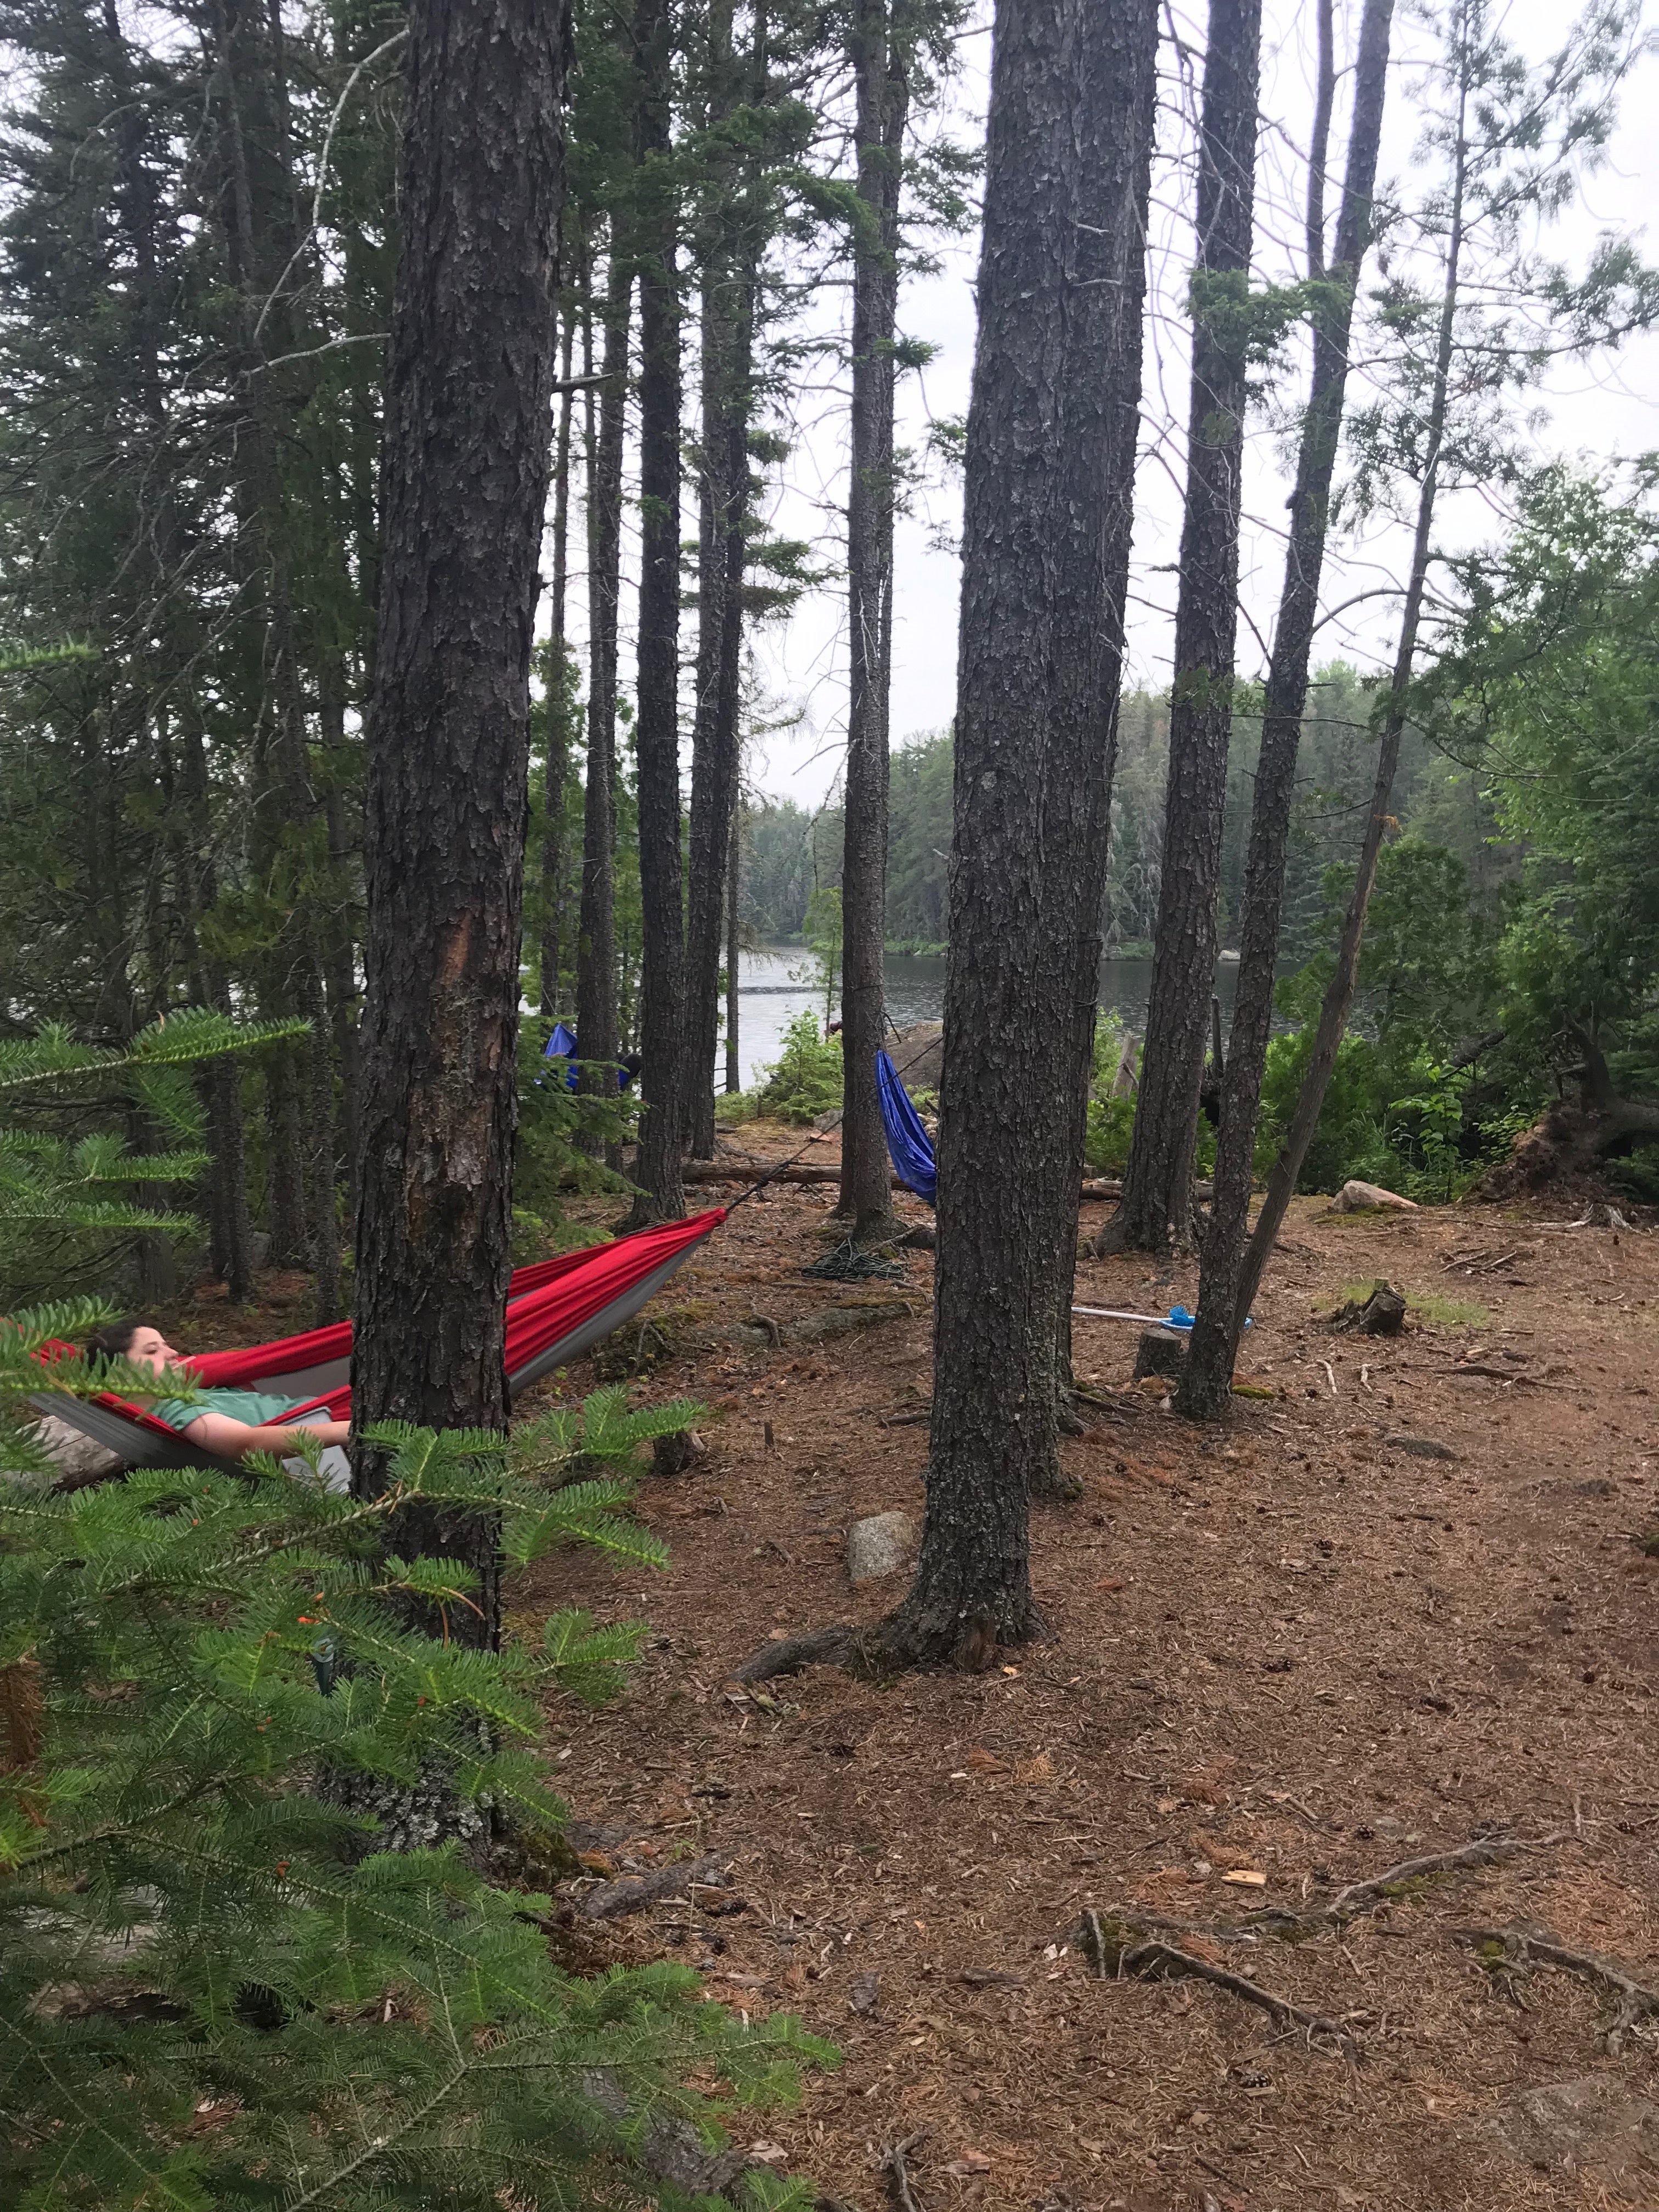 Camper submitted image from Boundary Waters Canoe Area, North Temperance Lake Backcountry Camping Site #905 - 3